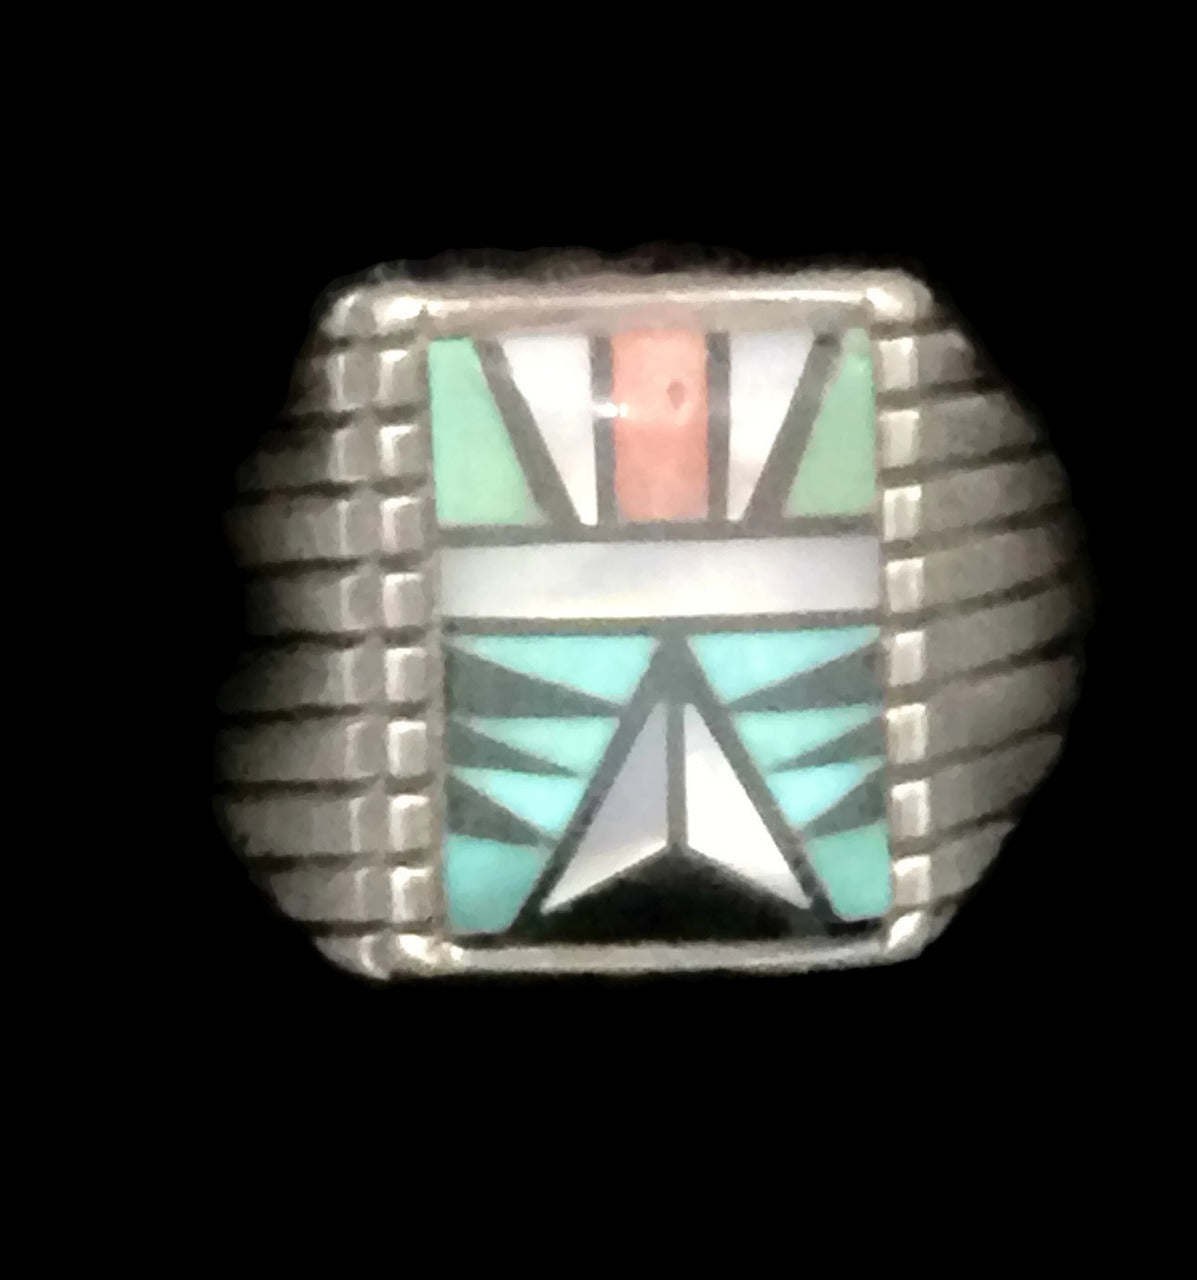 Zuni Ring Turquoise Onyx Vintage Sterling Silver Size 9.7